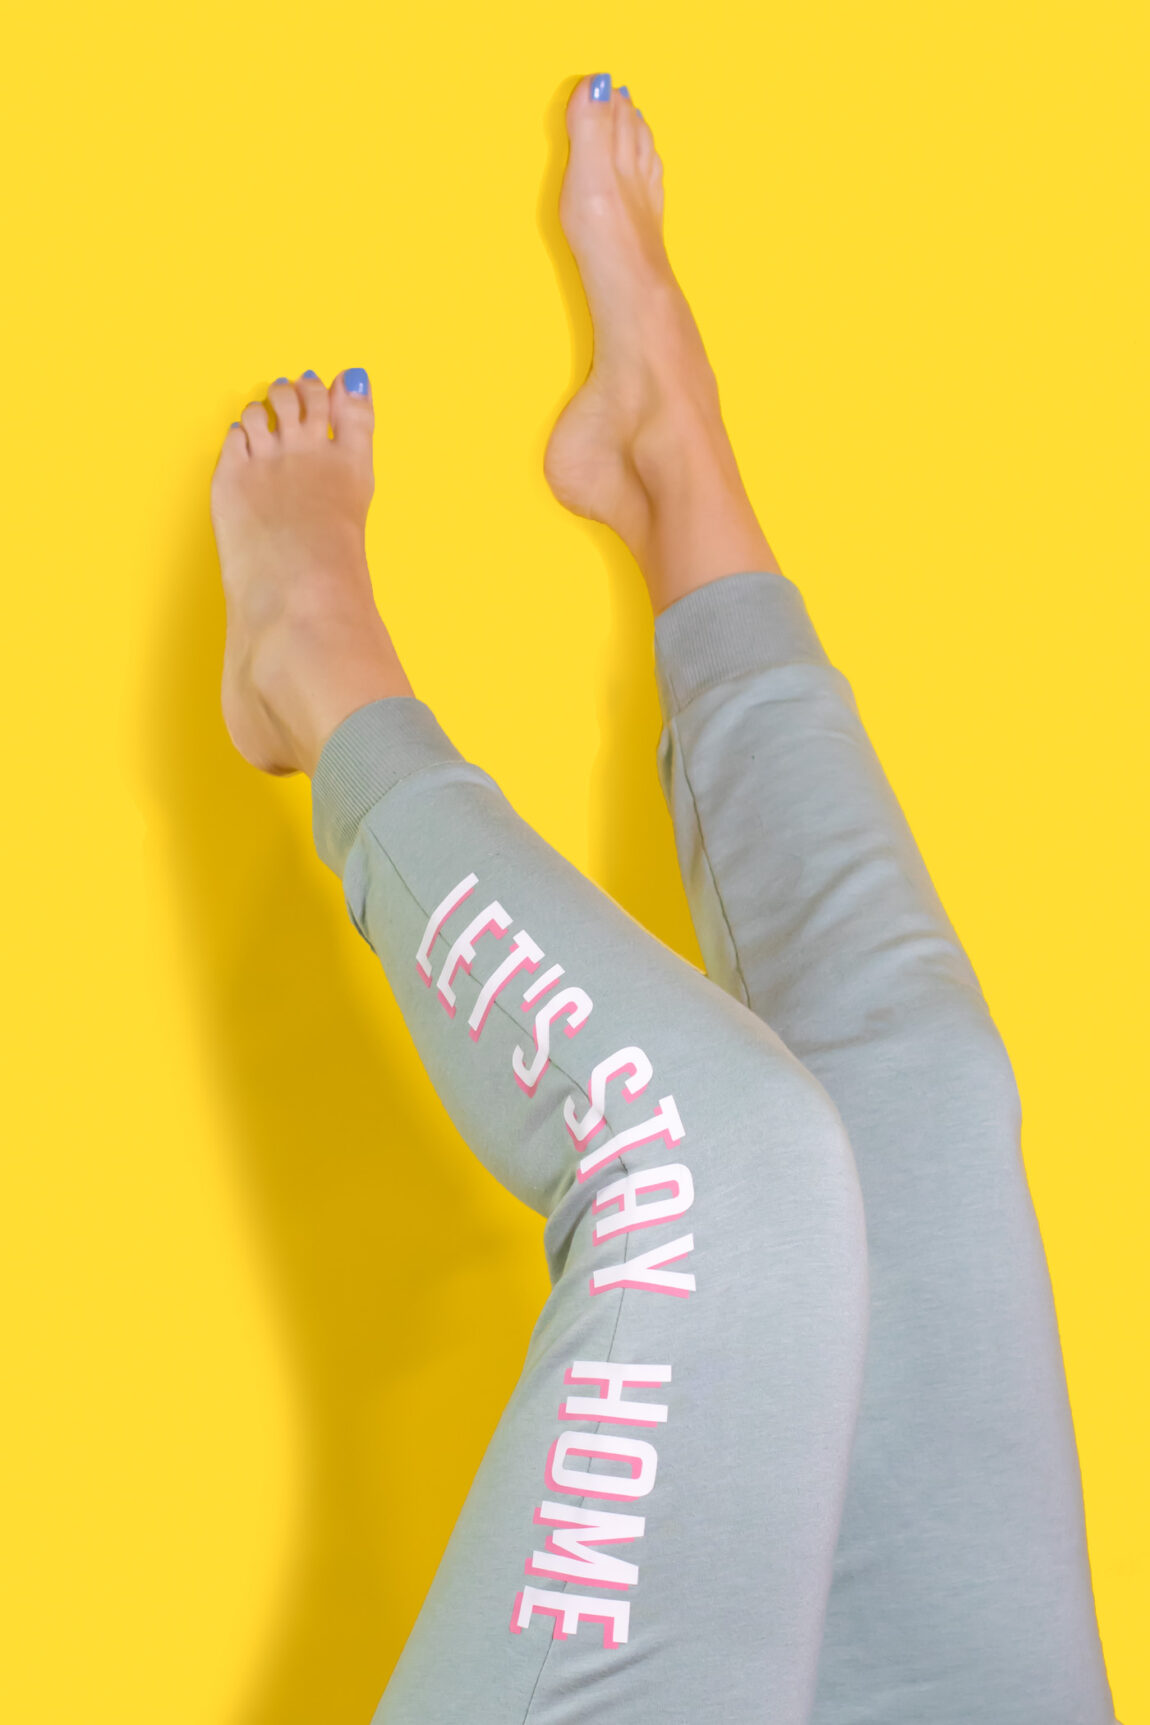 "Let's Stay Home" DIY Graphic Sweatpants with Iron-On Vinyl (Cricut) // Update a pair of plain sweats with a cute saying using vinyl! #cricutmade #ironon #vinyl #fashion #diyfashion #nosew #sweatpants #womensstyle #stylediy